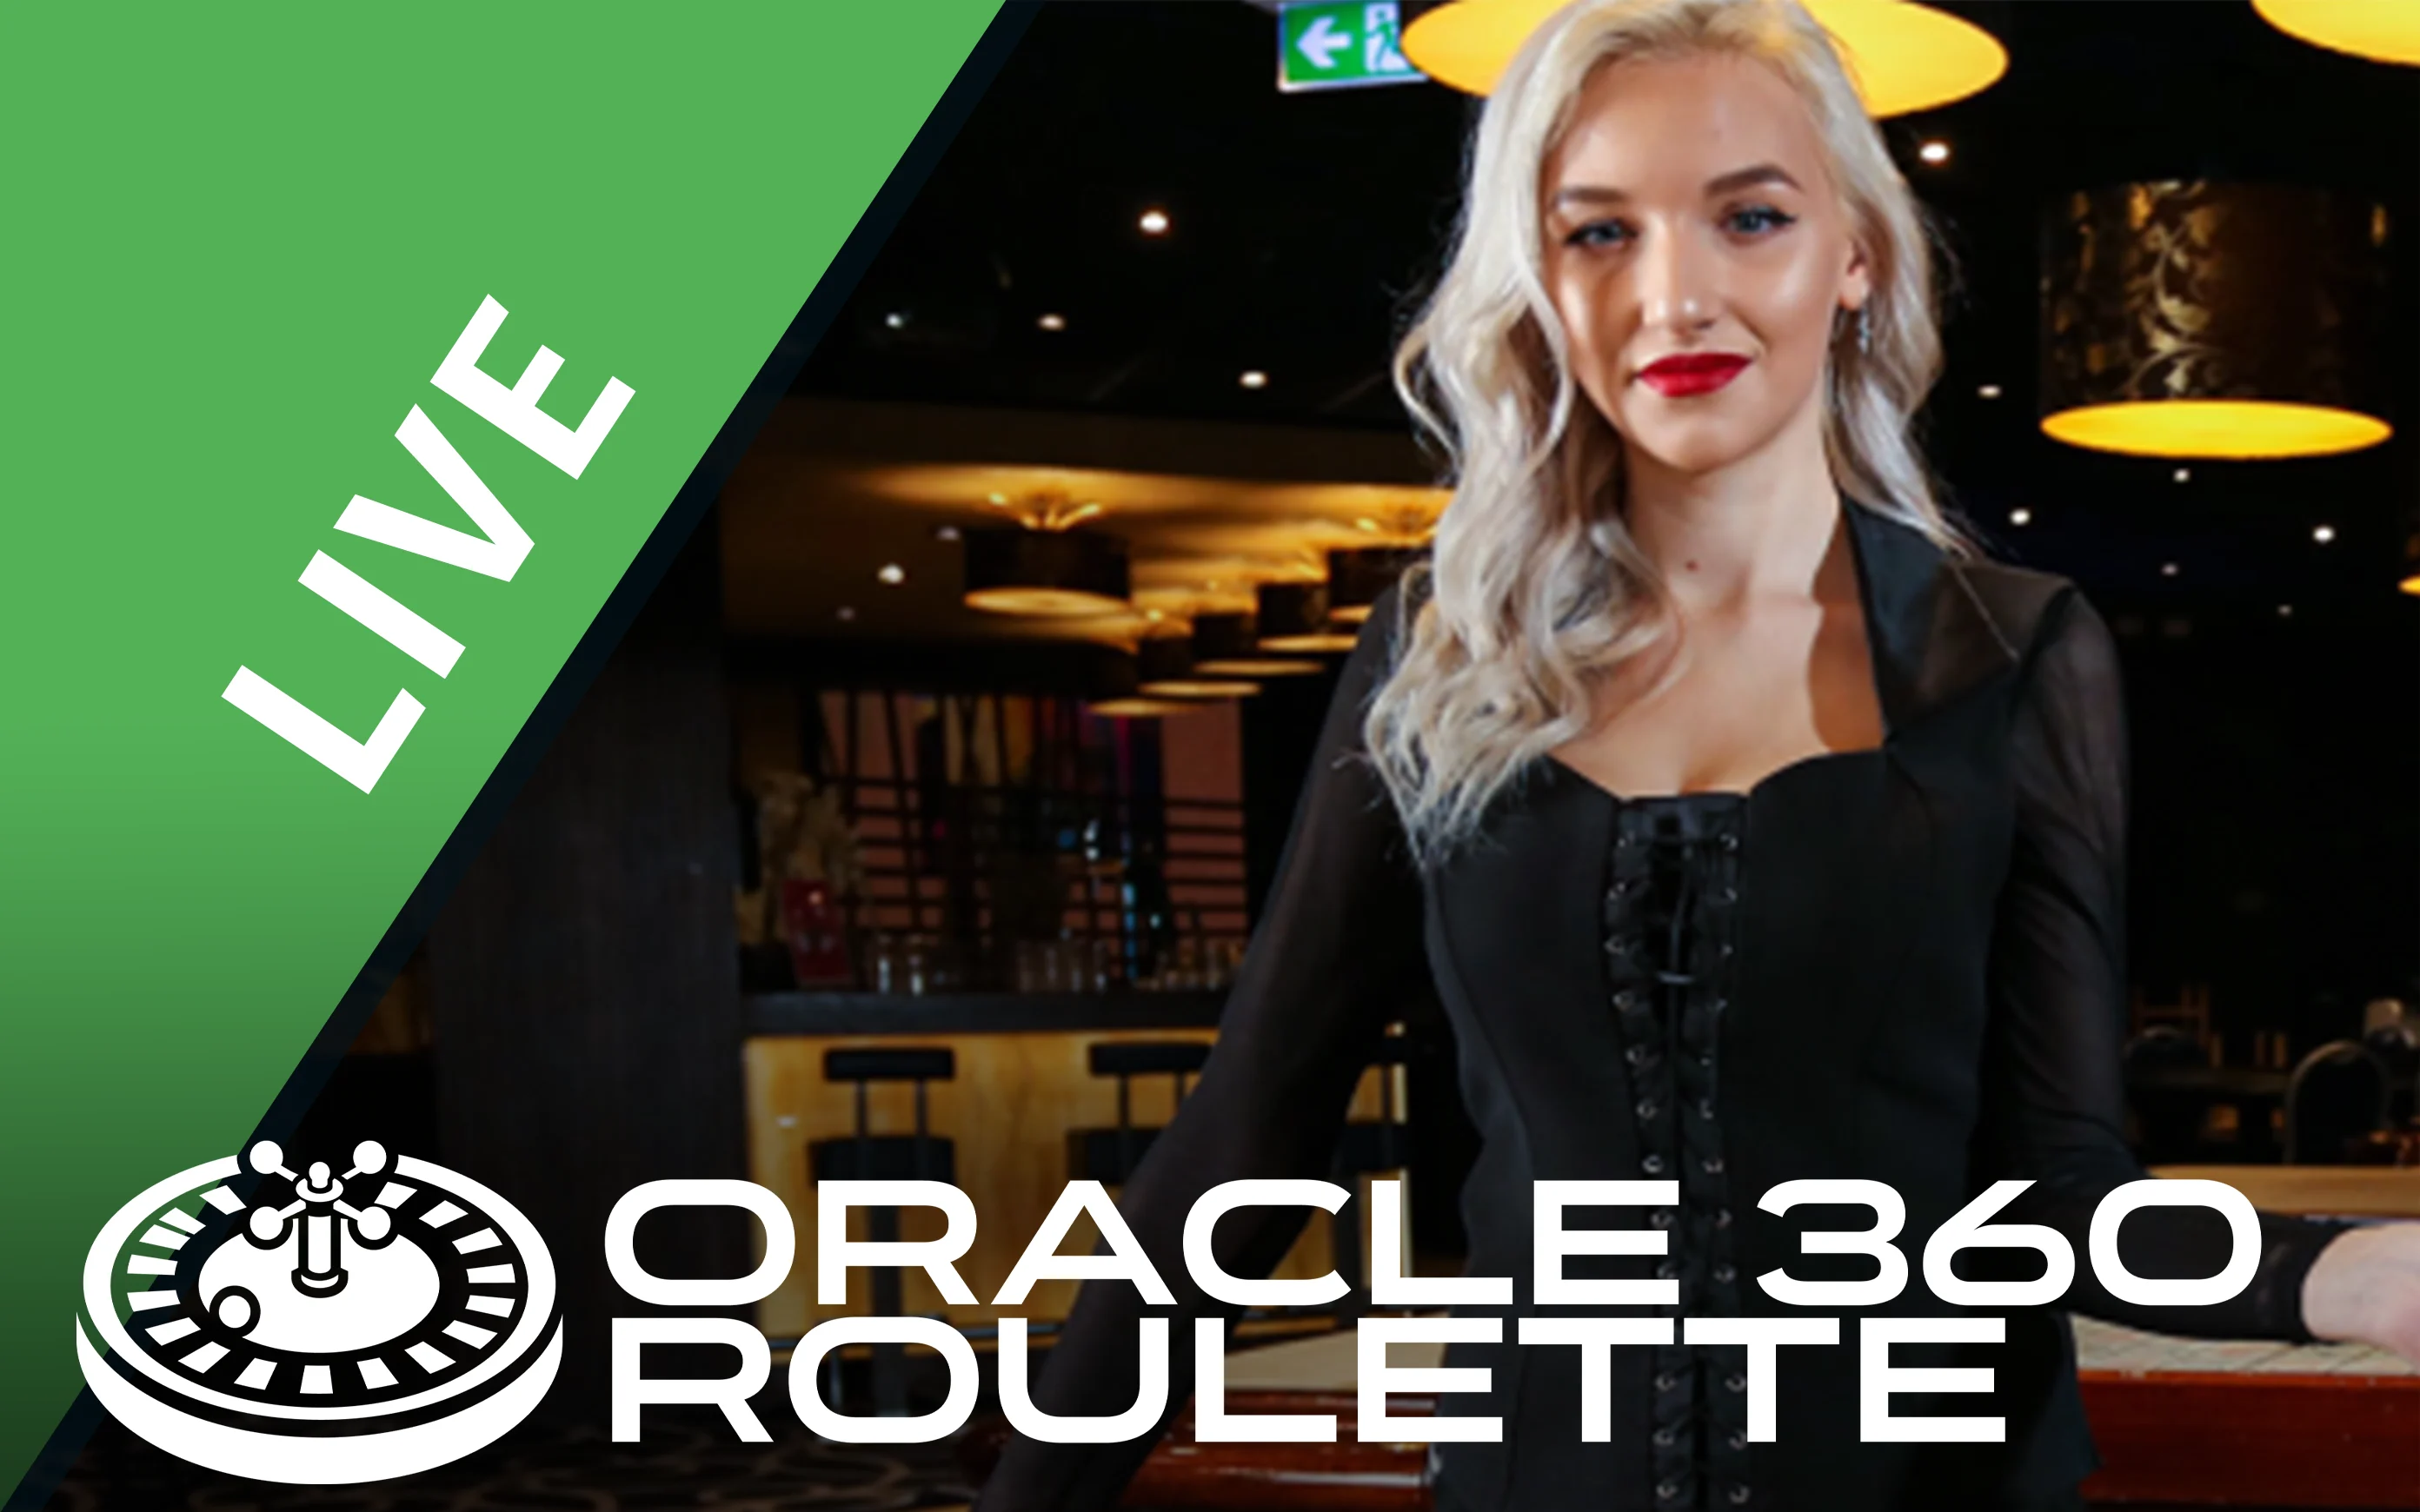 Play Oracle 360 Roulette on Starcasino.be online casino